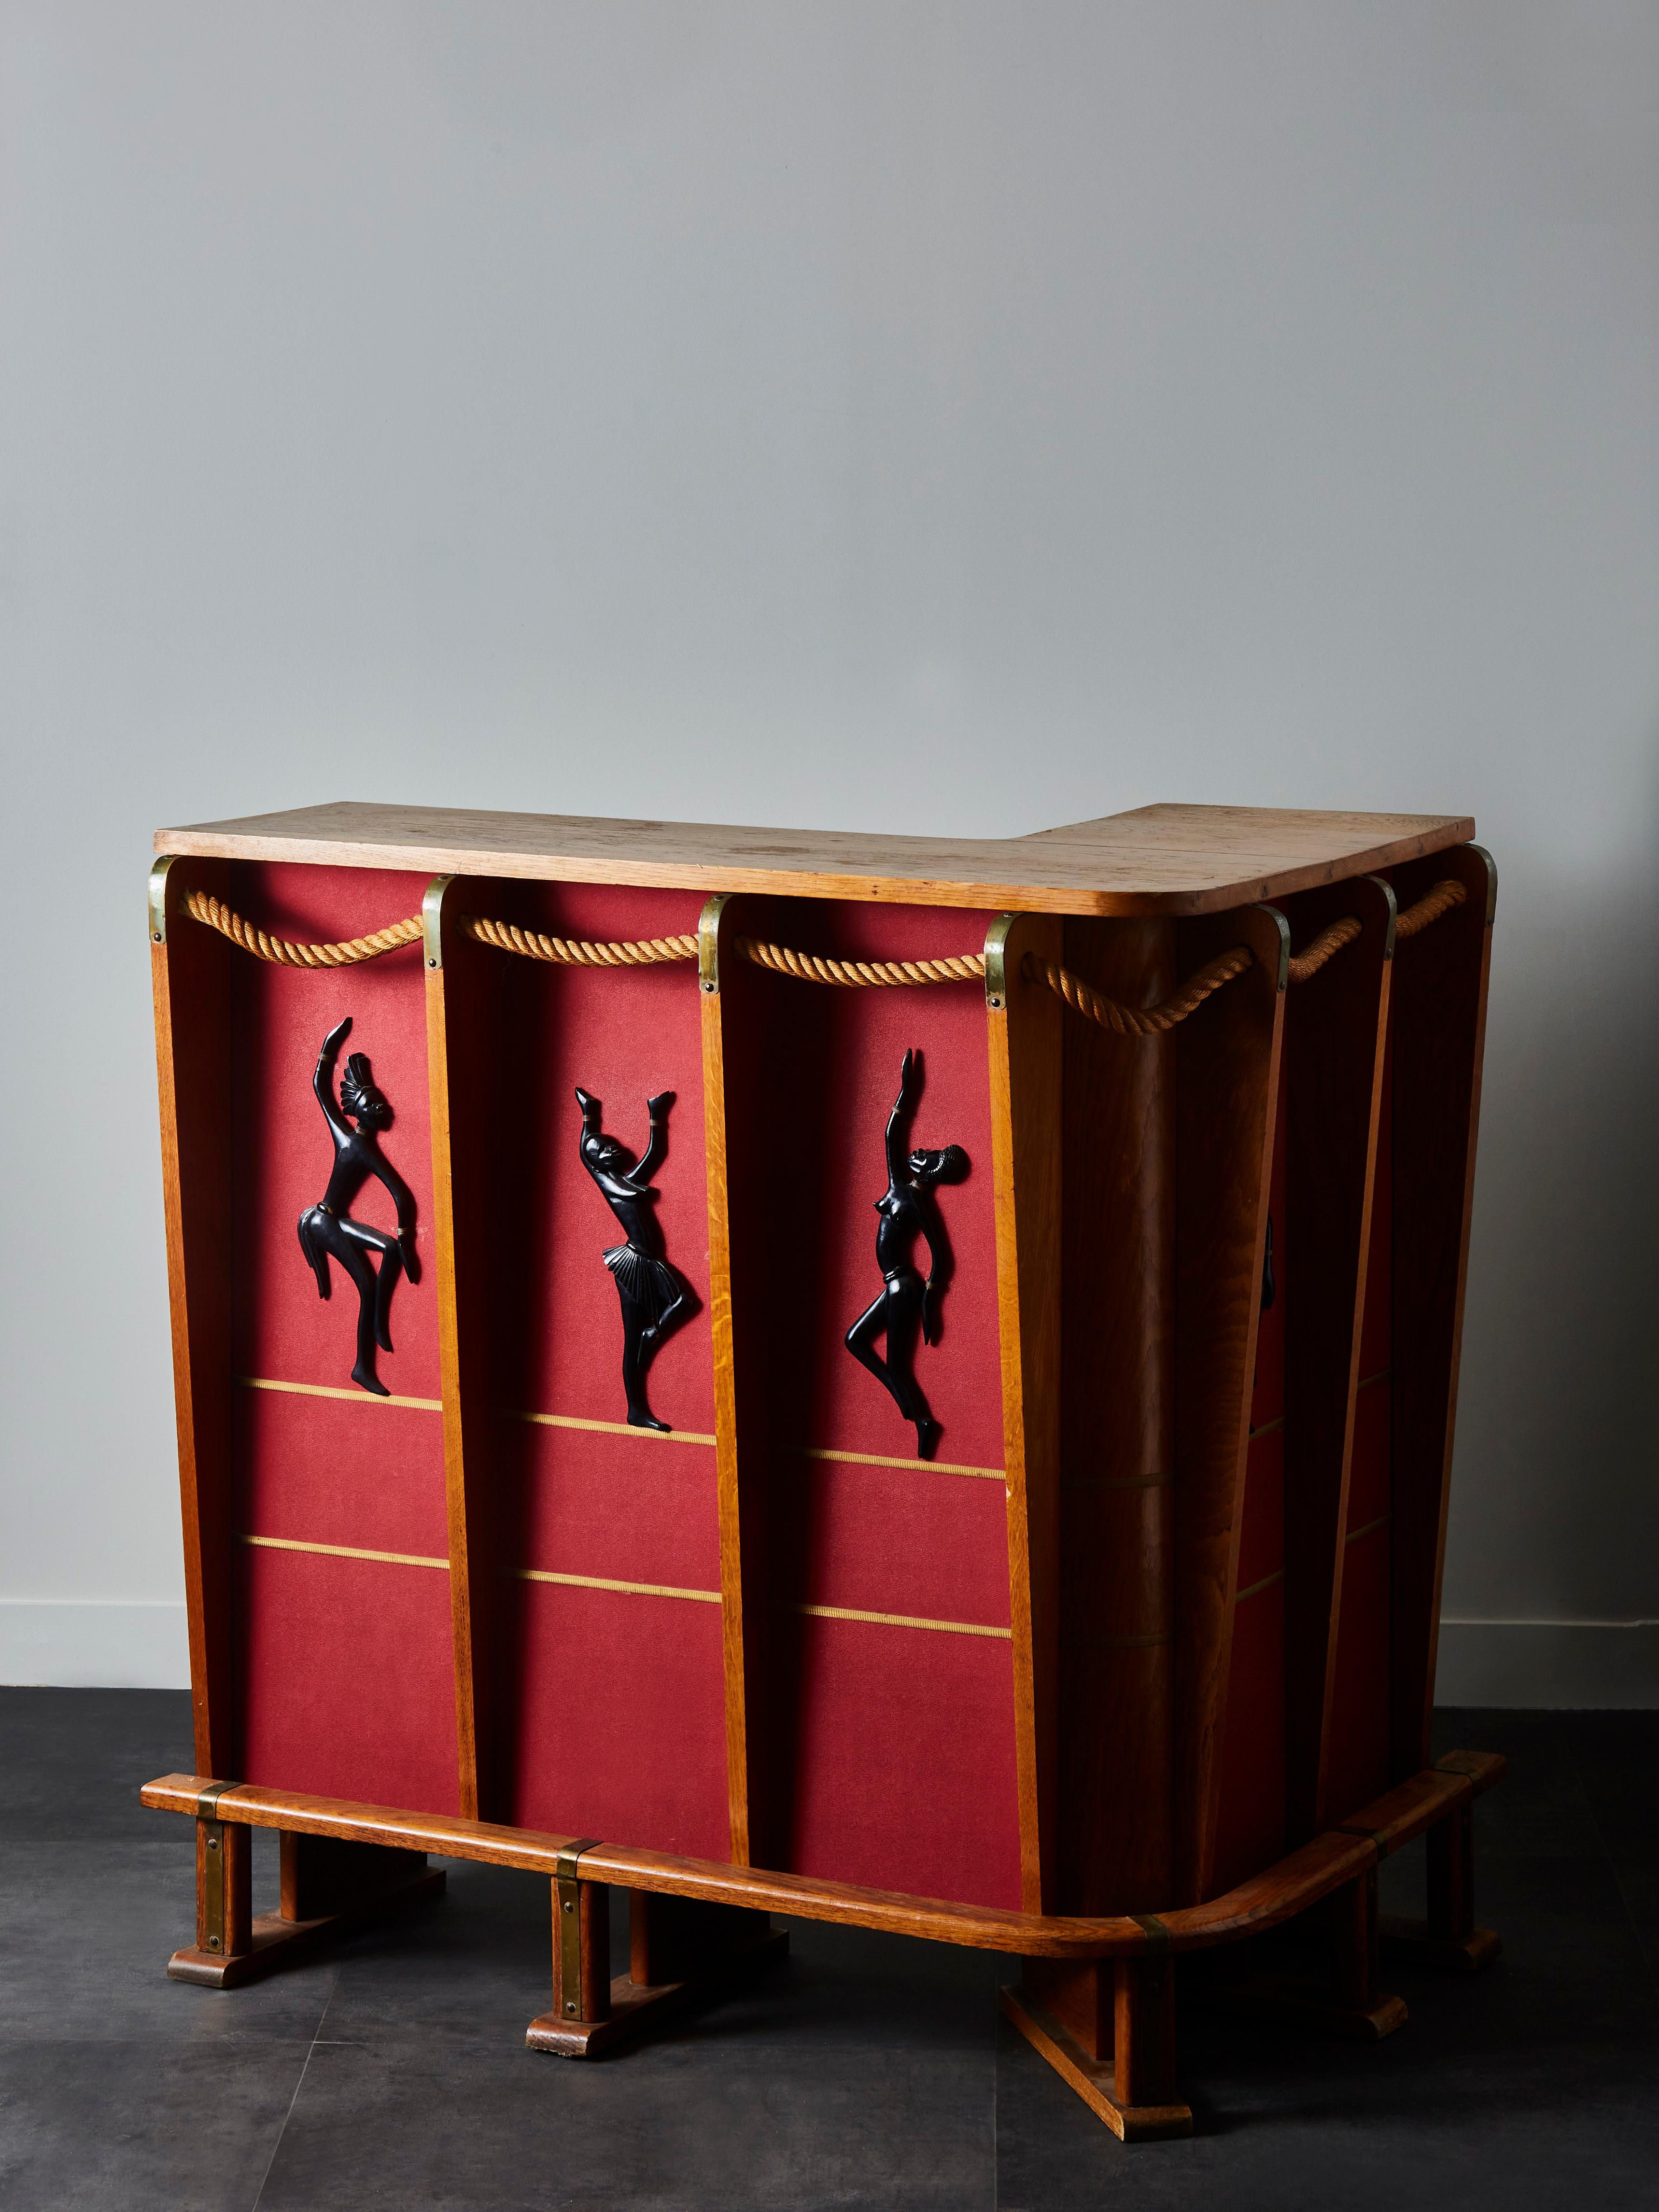 This bar by Audoux-Minet is made of oak and rope, five African dancers decorating each panel.